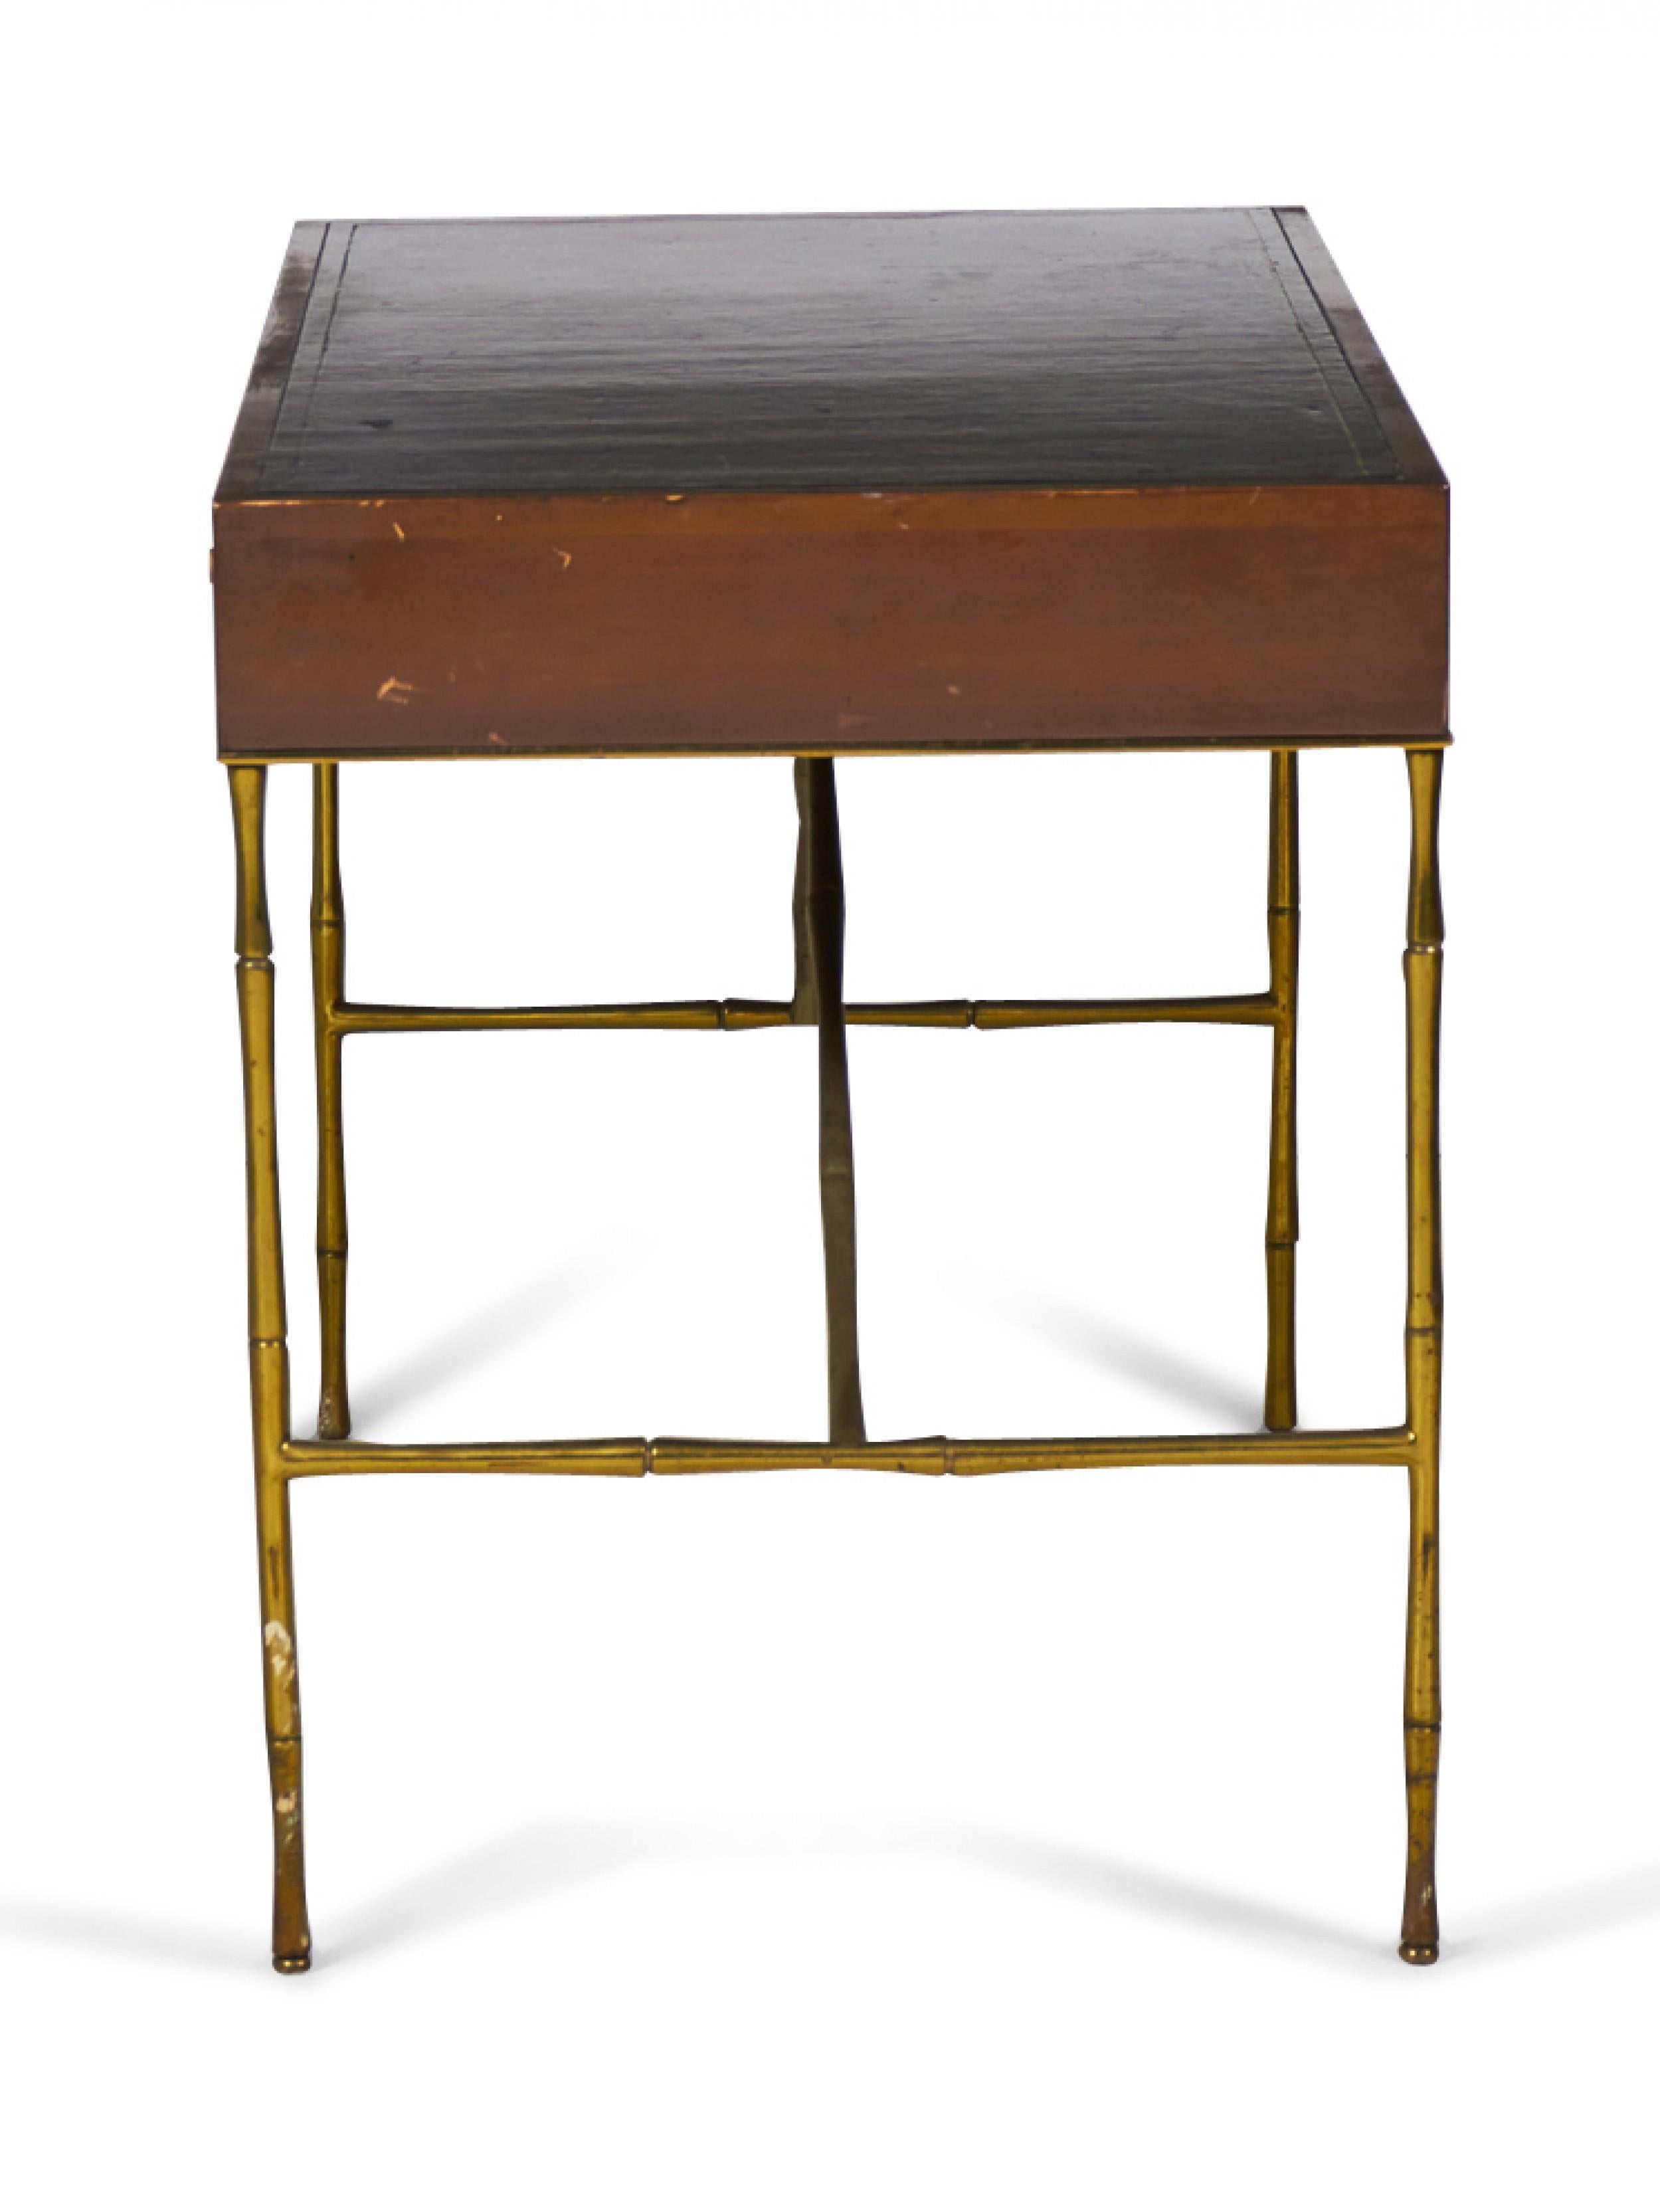 American Mid-Century walnut desk with a black leather top and three drawers with rounded wooden drawer pulls, resting on four stretcher-connected brass faux bamboo legs. (BAKER FURNITURE CO.).